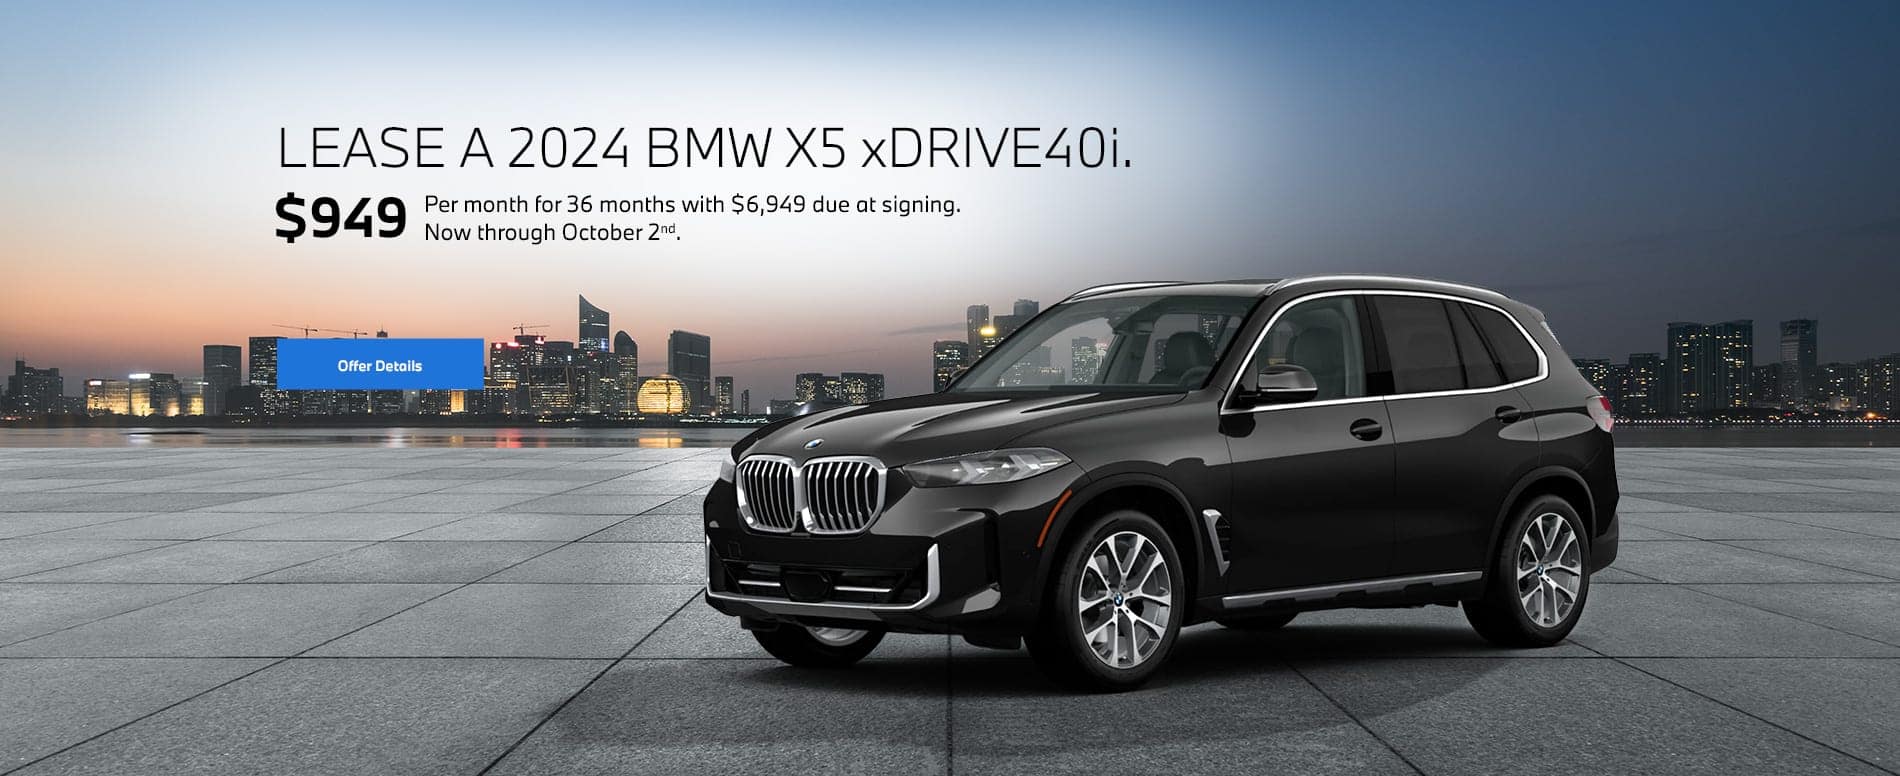 2024 X5 lease starting at $949 per month for 36 months